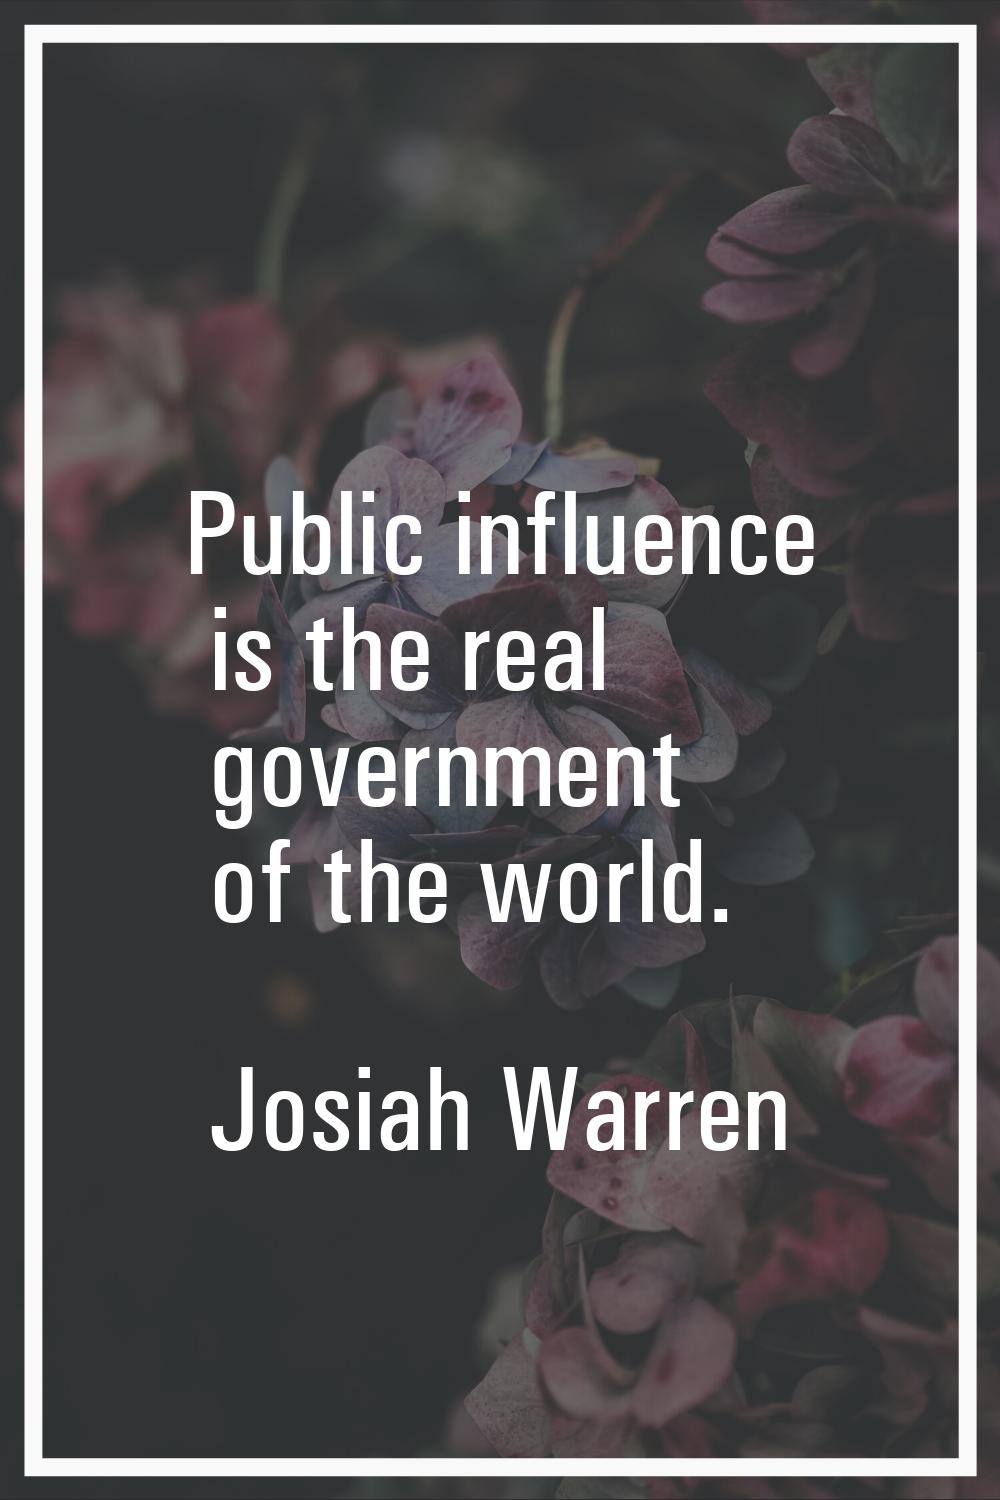 Public influence is the real government of the world.